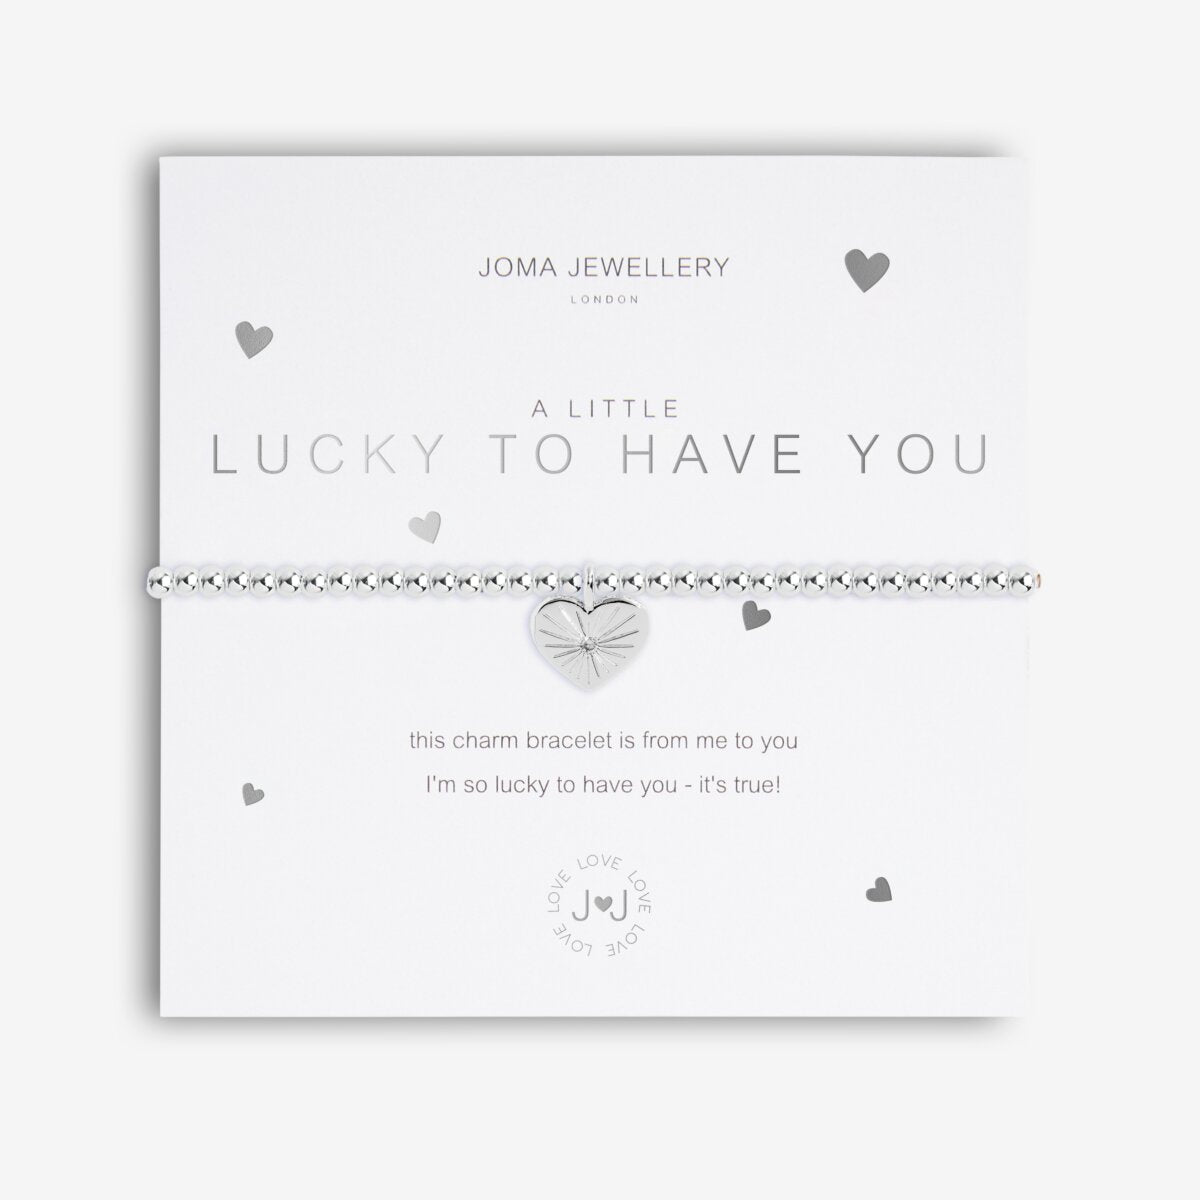 Joma Jewellery 'A Little' Lucky To Have You